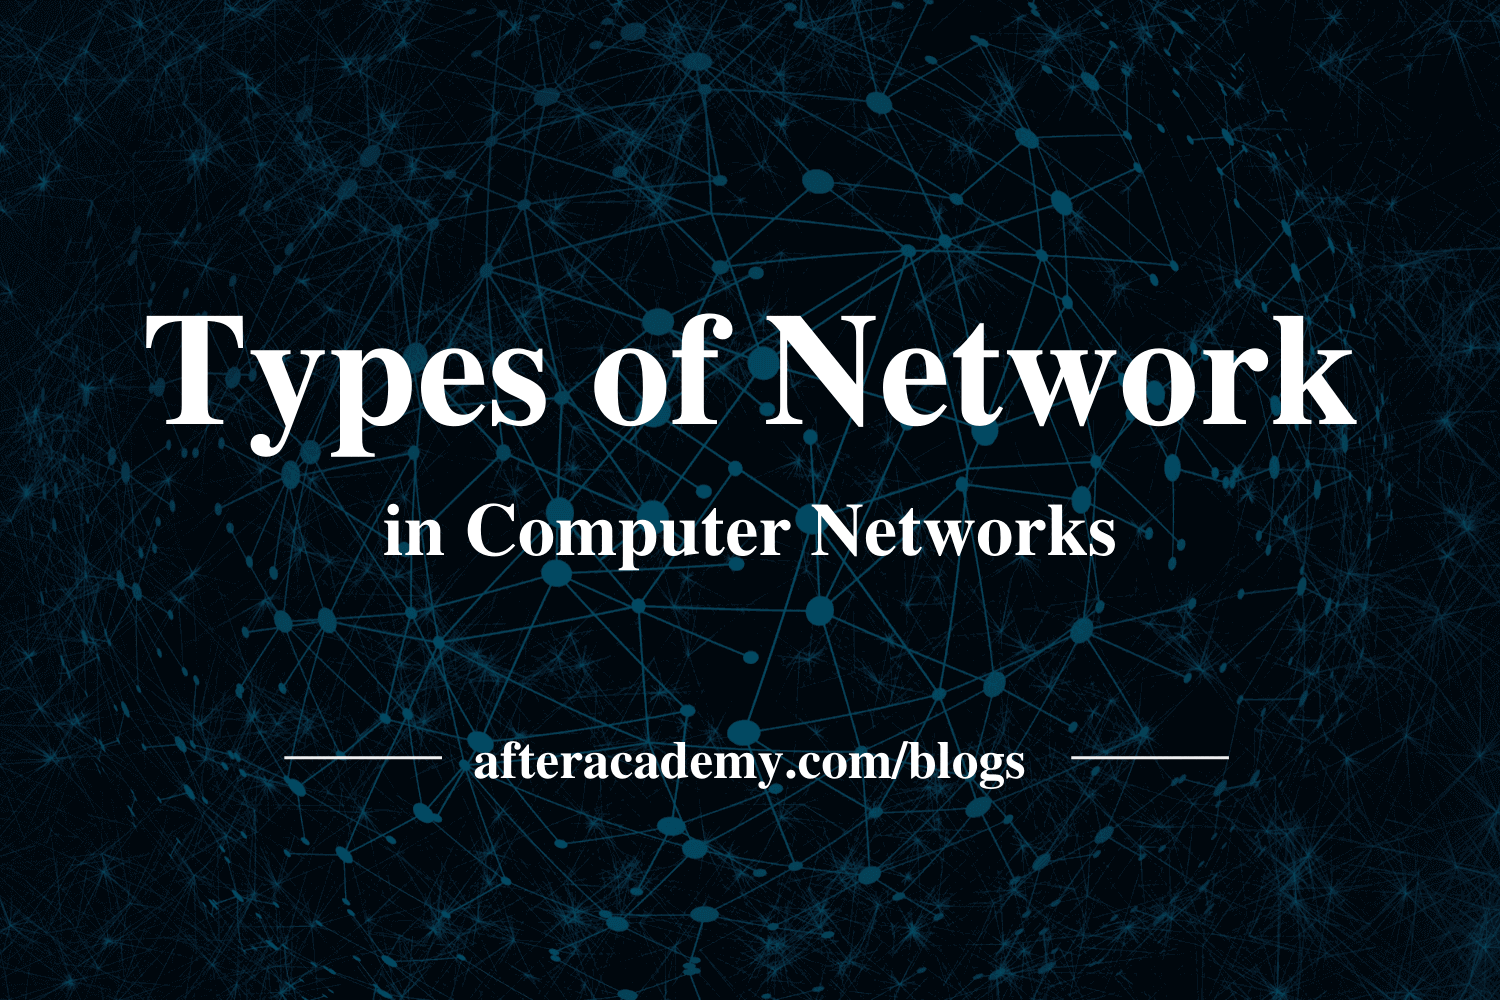 What are the different types of network?